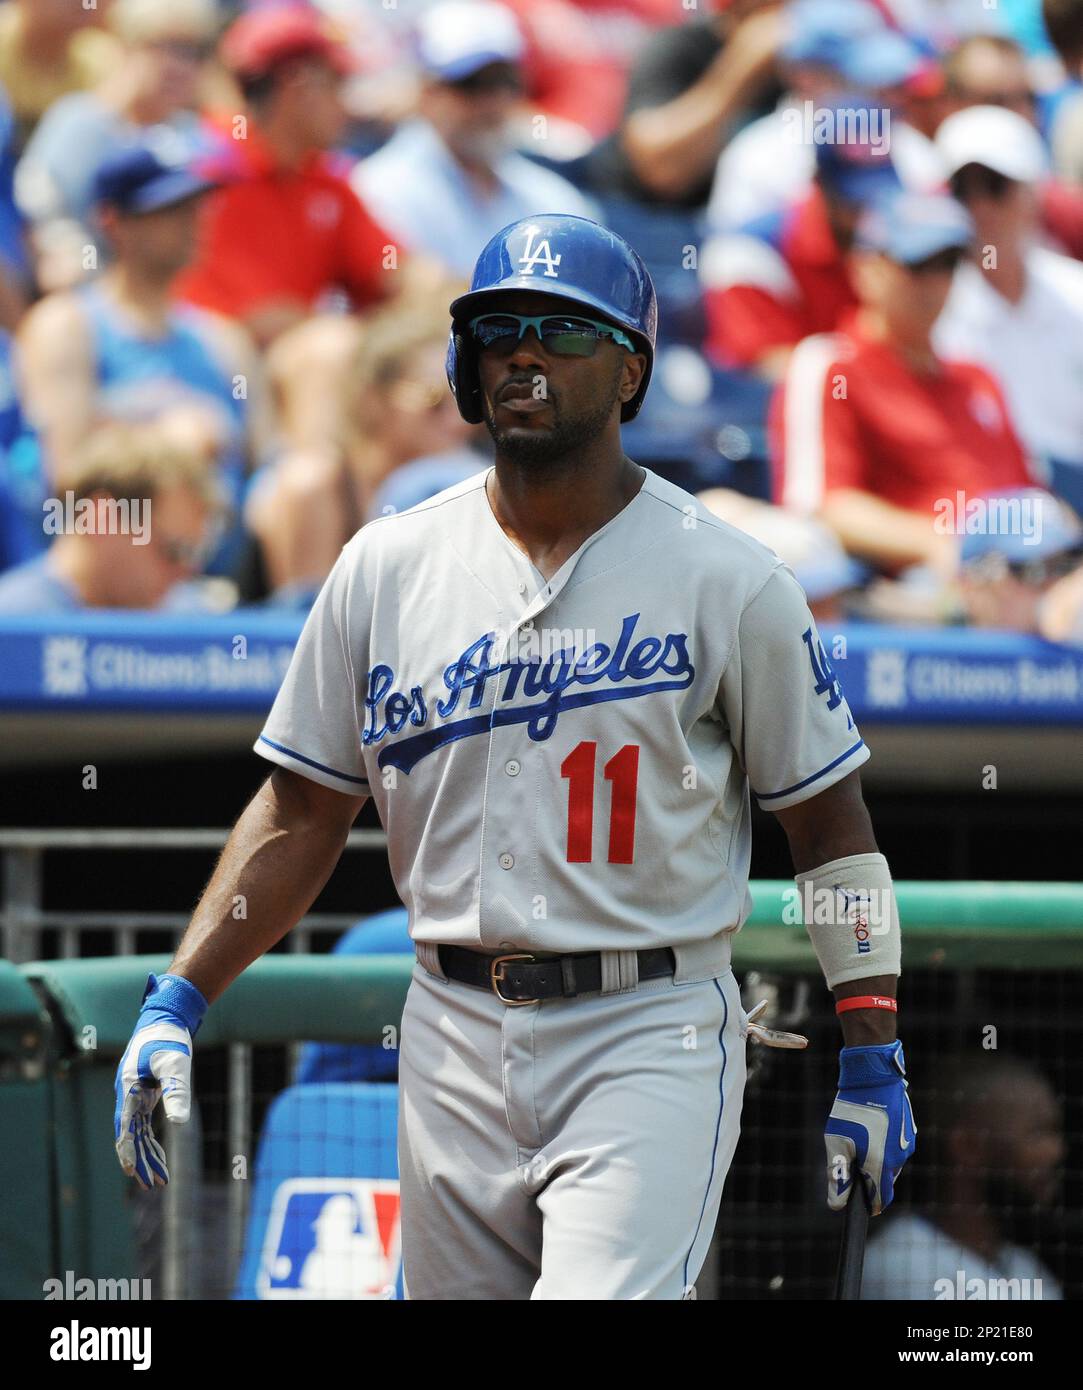 Los Angeles Dodgers infielder Jimmy Rollins (11) during game against the  Philadelphia Phillies at Citizens Bank Park in Philadelphia, Pennsylvania  on August 6, 2015. Dodgers defeated Phillies 10-8. (Tomasso DeRosa via AP  Stock Photo - Alamy